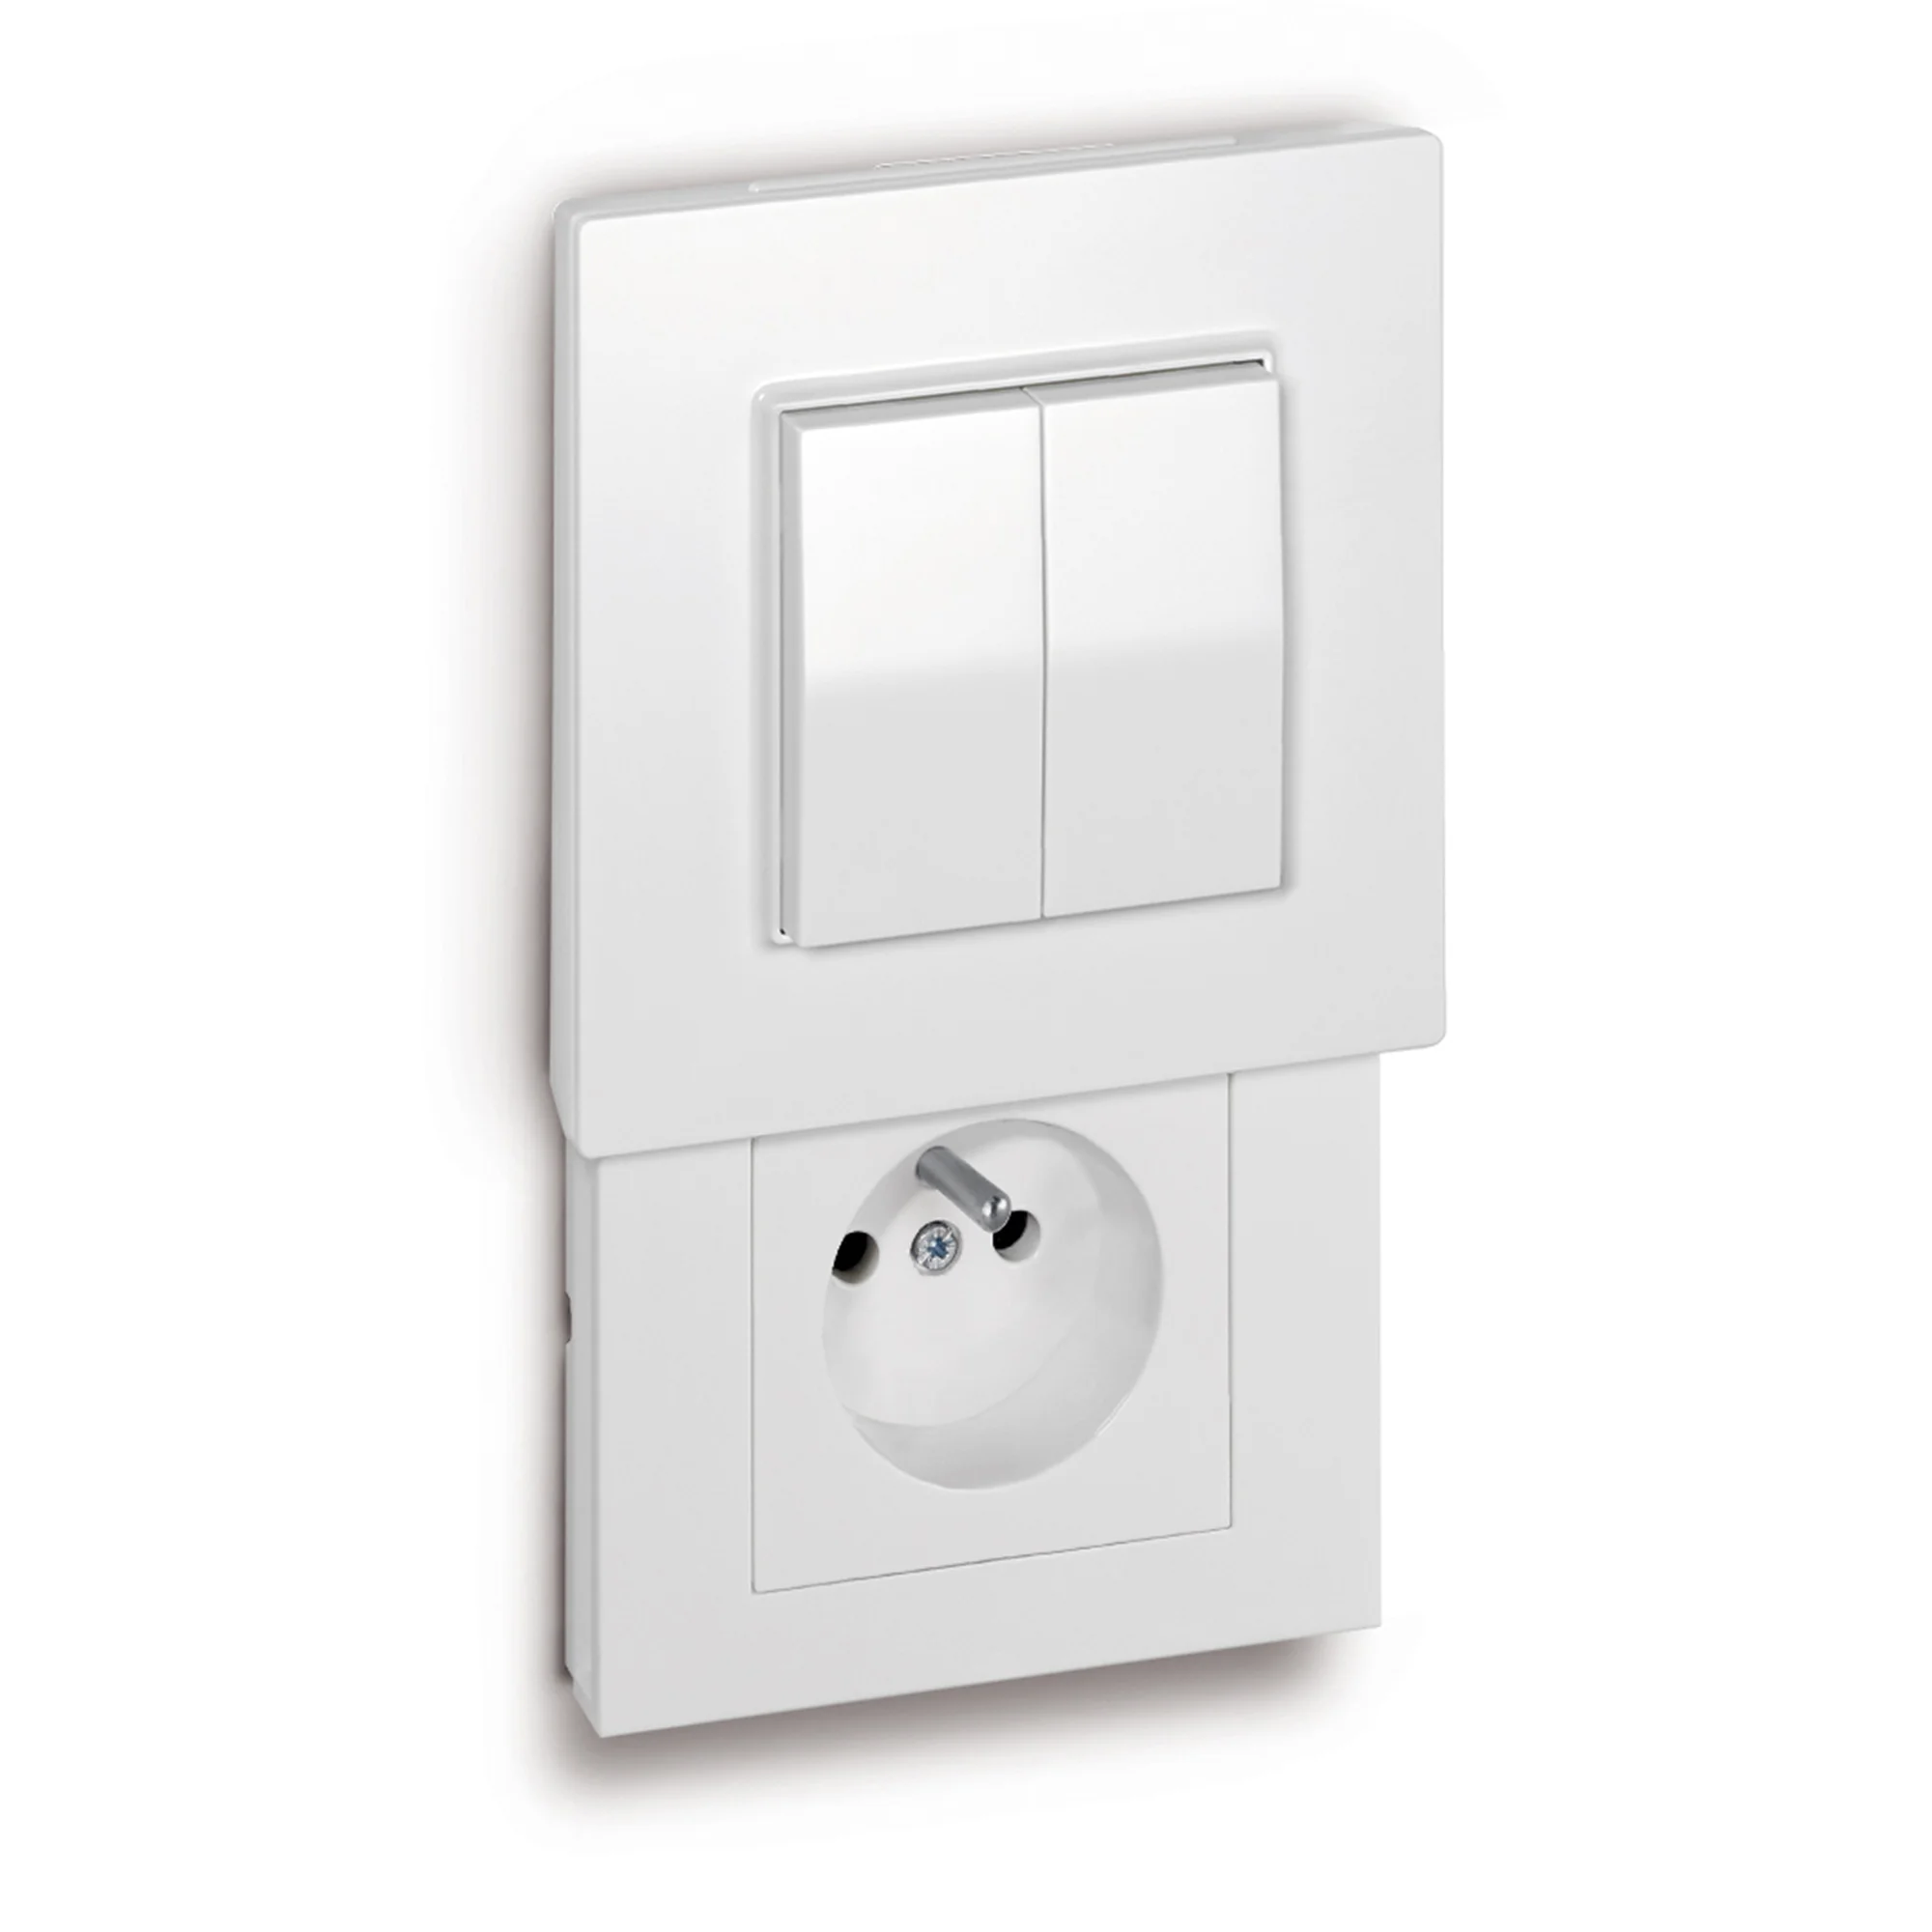 Hidden Socket | Versteckdose® with Casambi switch with socket insert for plug type E (FR, BE)